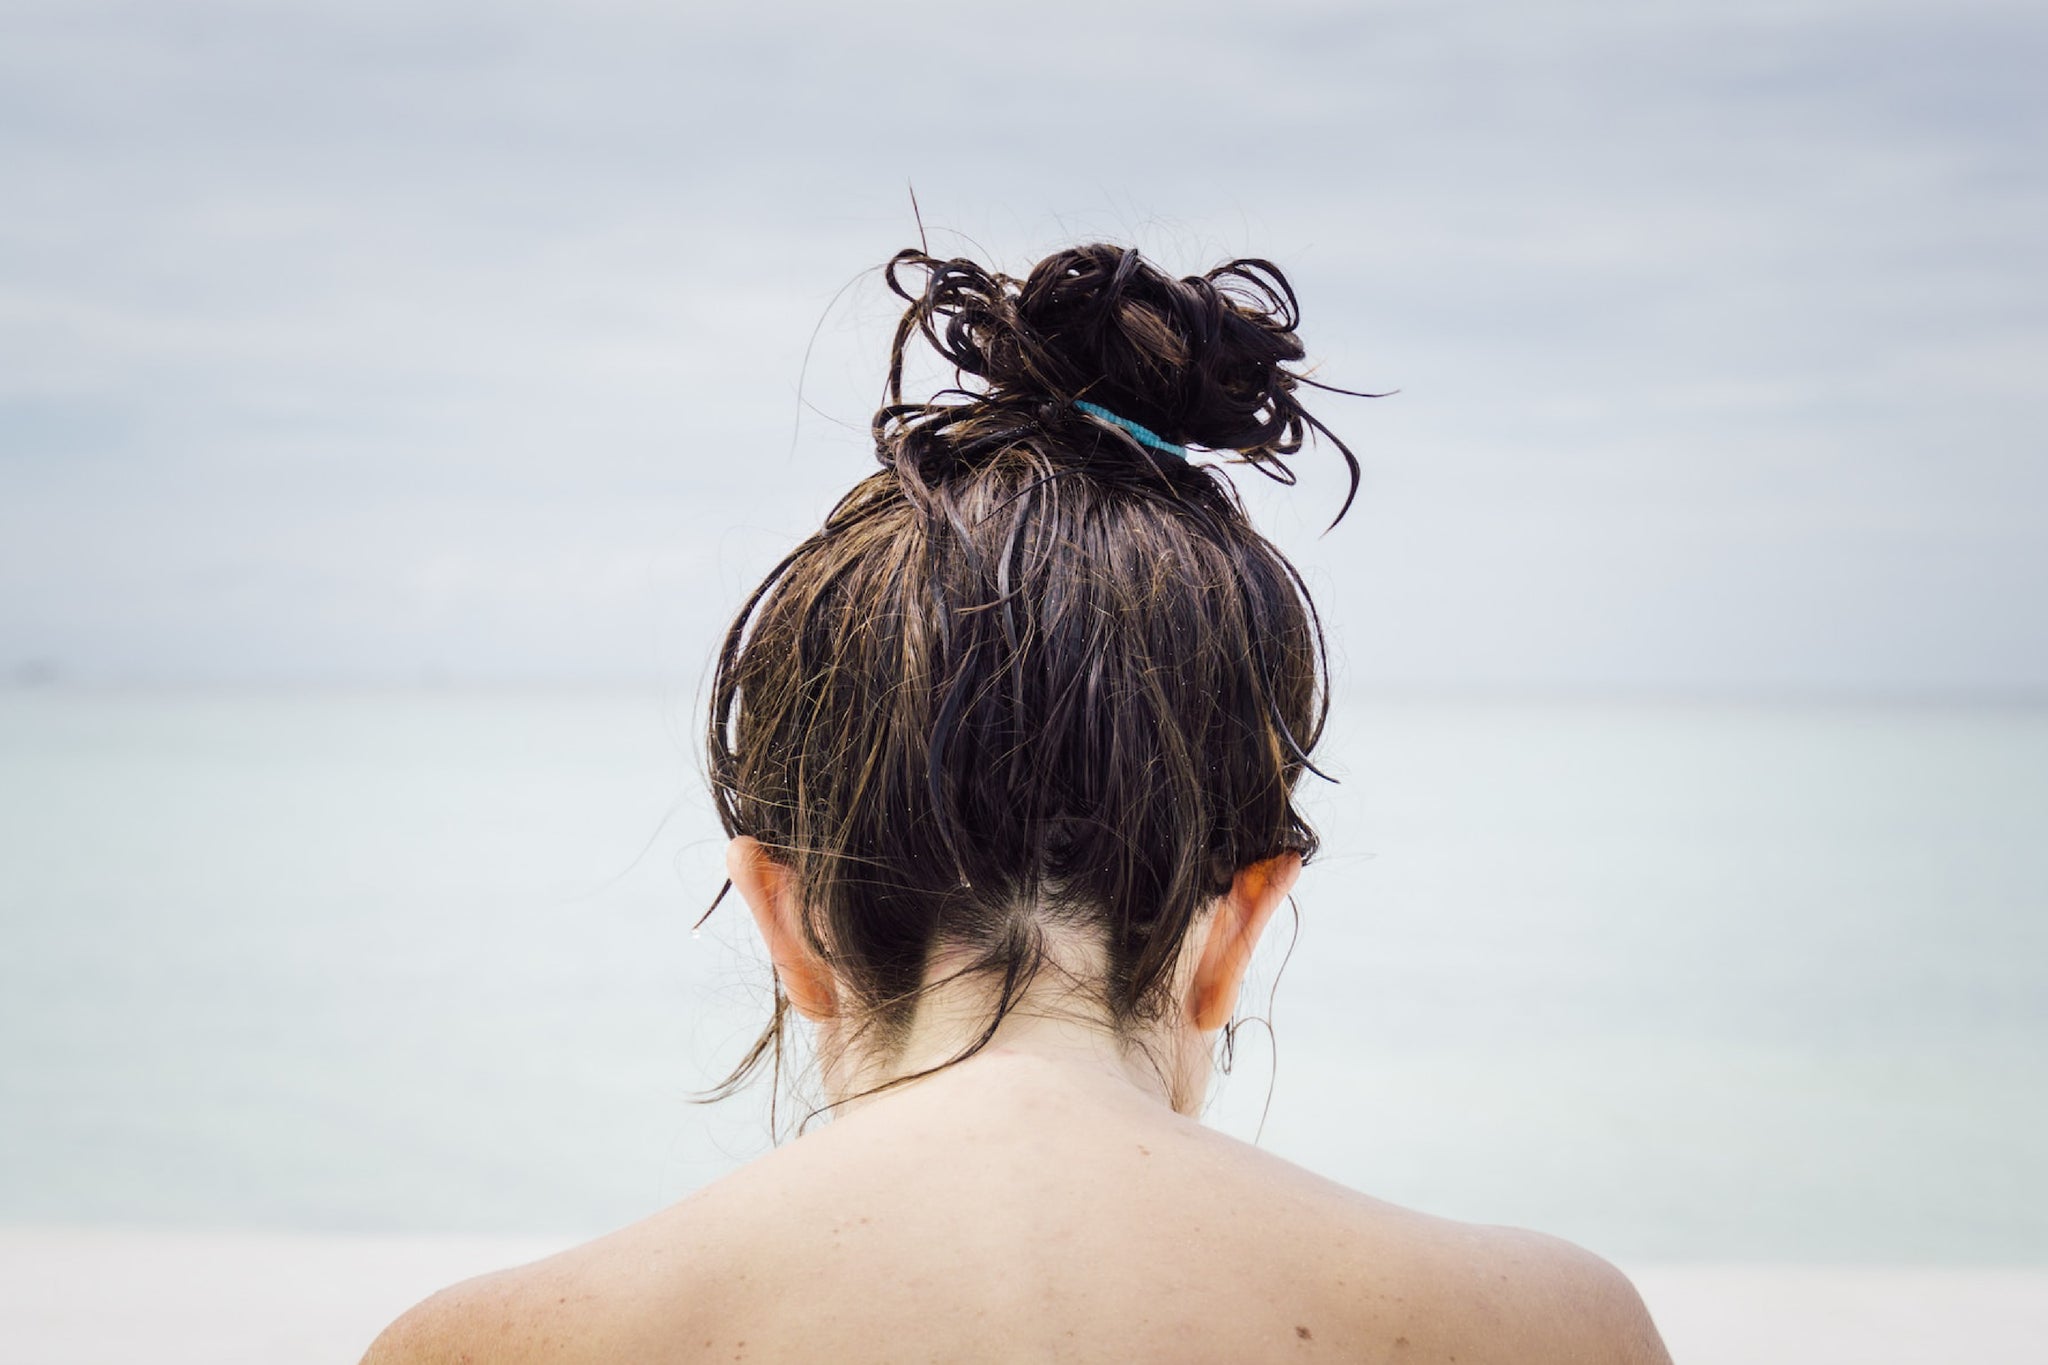 Can Water Quality Be the Cause of Your Hair Problems?